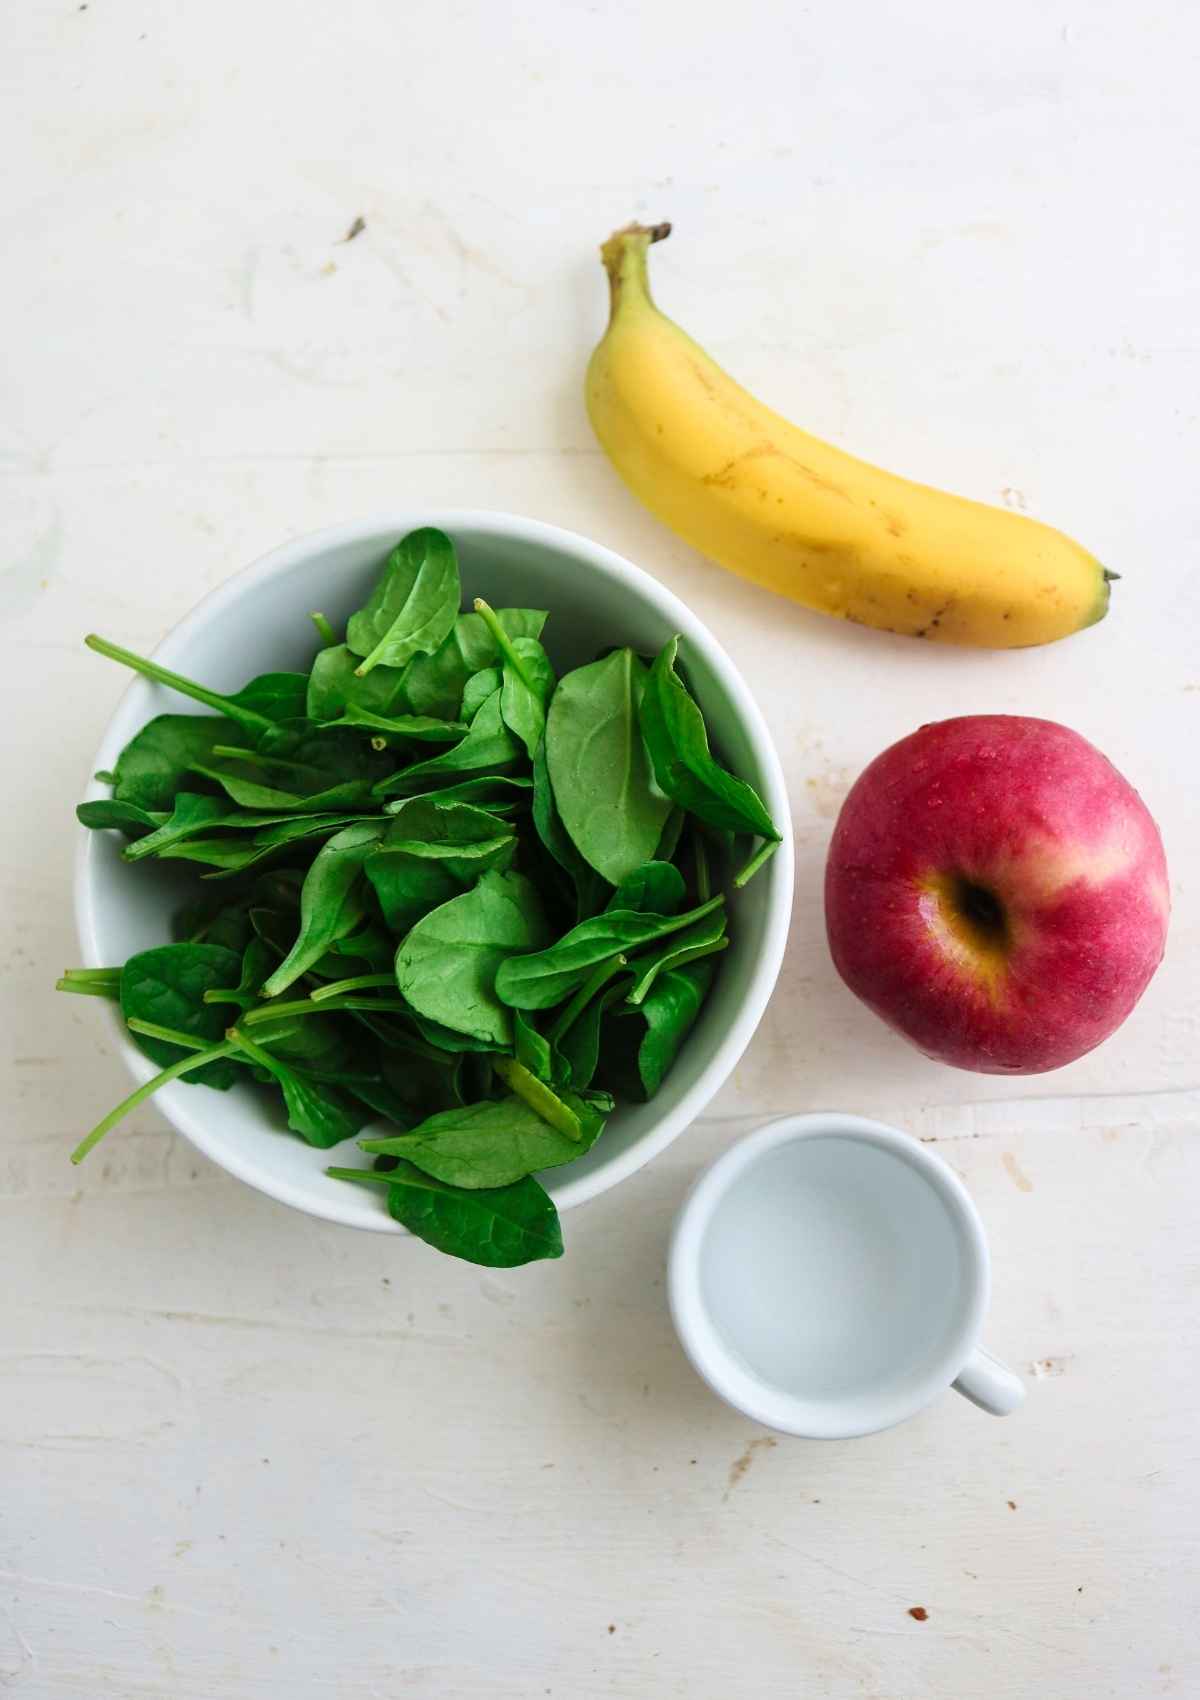 Ingredients to make spinach and banana smoothie